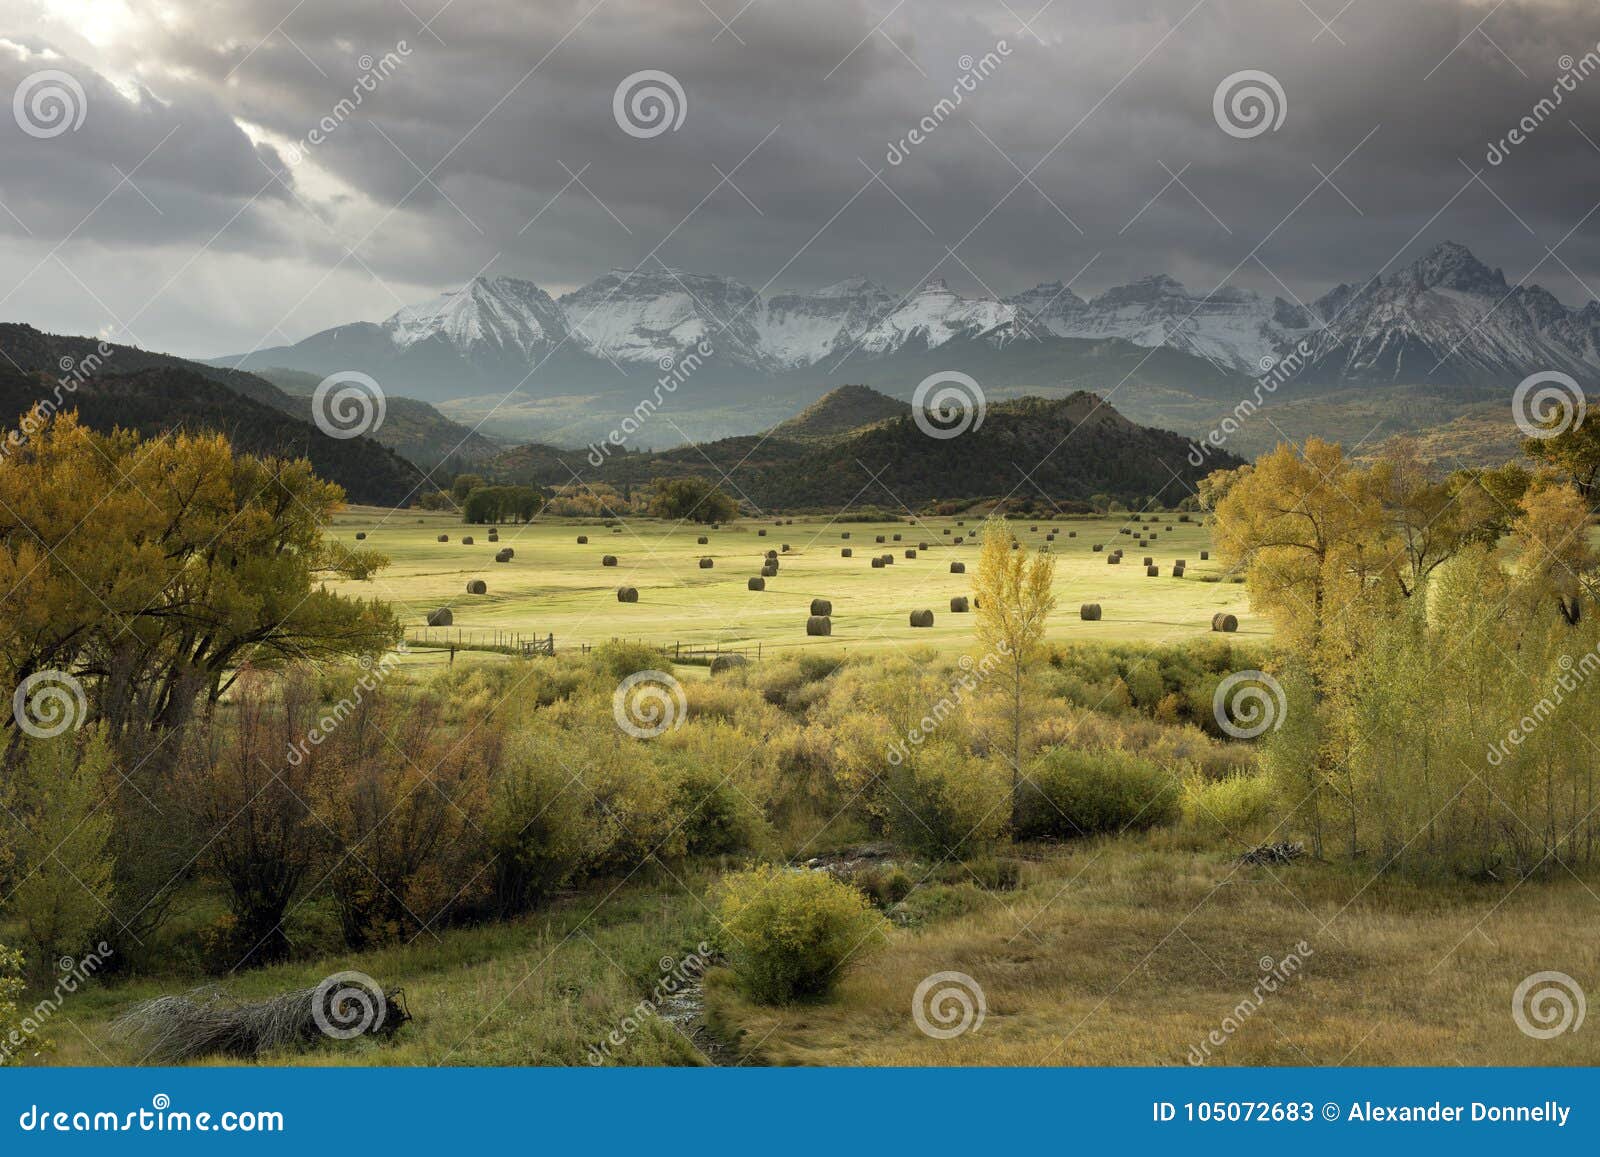 fall view of hay bales in a field with san juan mountain range of the dallas divide just outside of ridgway, colorado